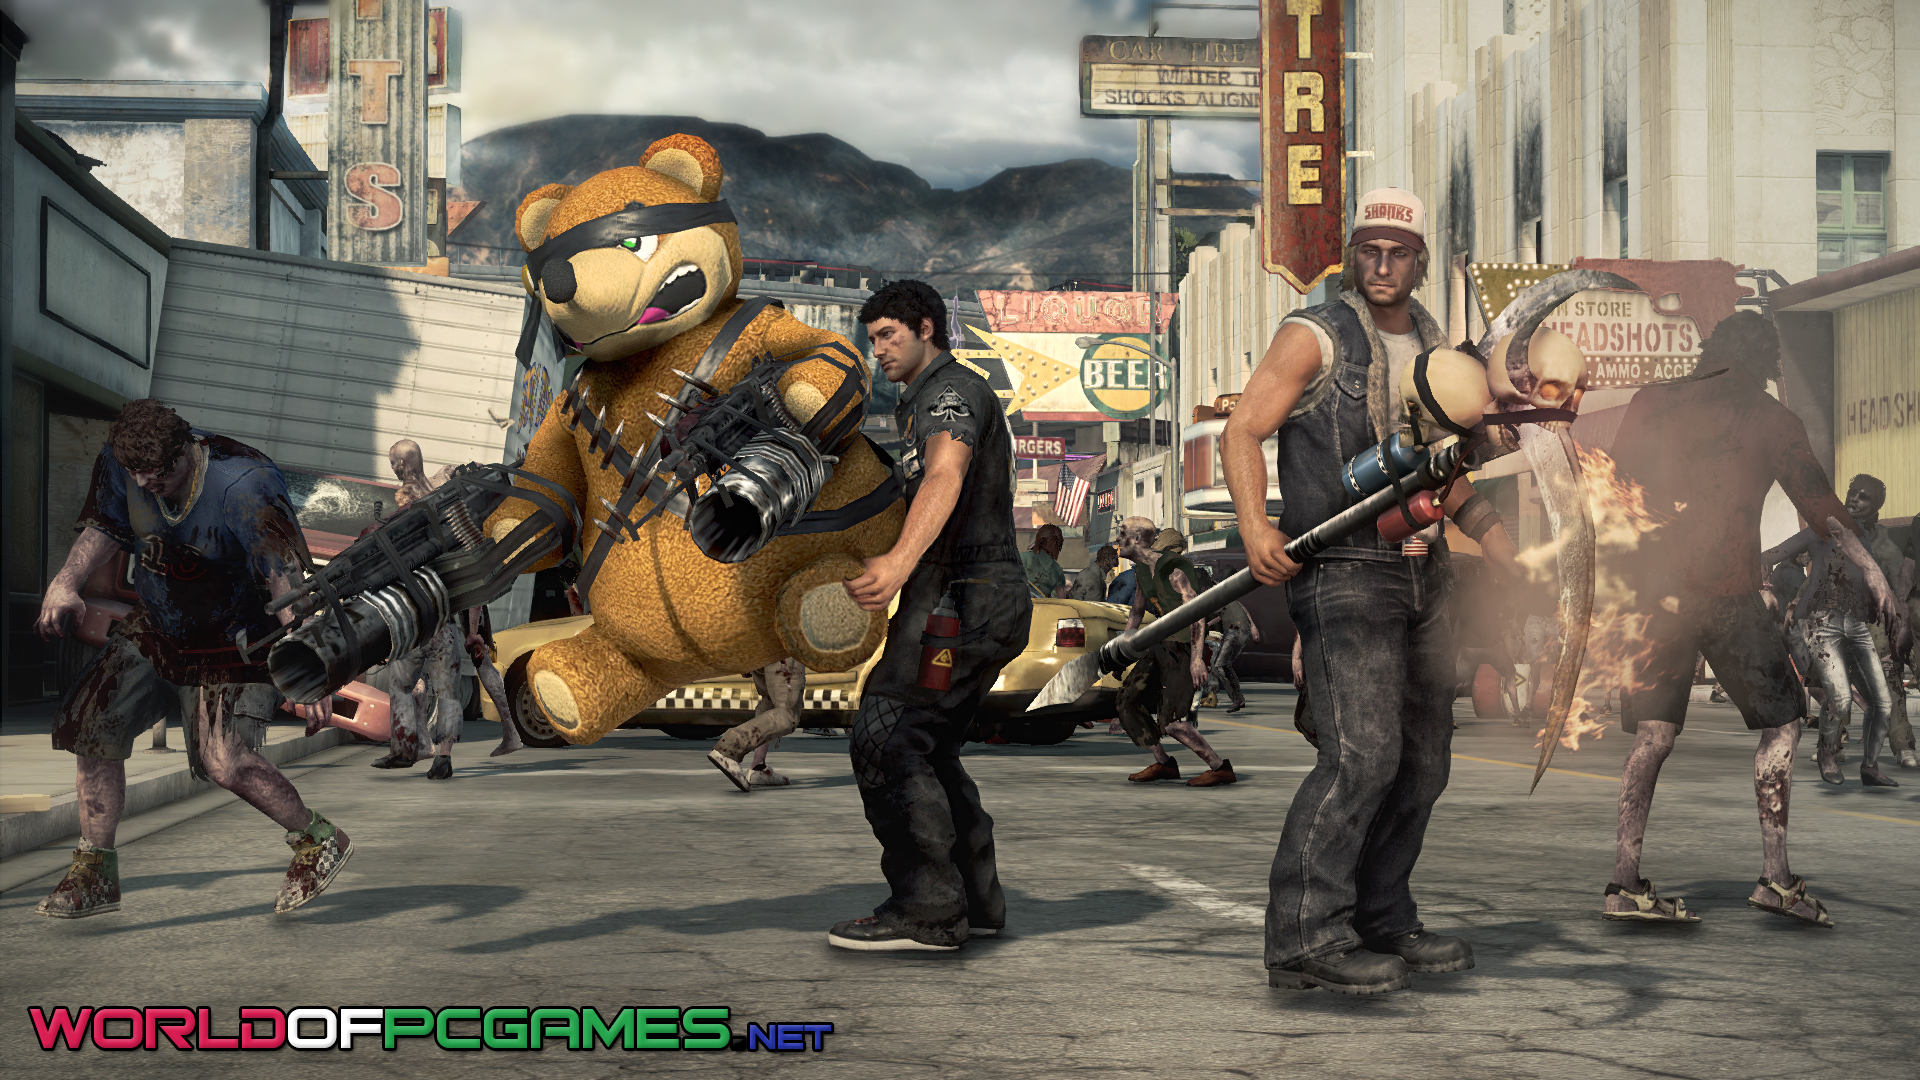 Dead Rising 3 Free Download PC Game By worldof-pcgames.netm